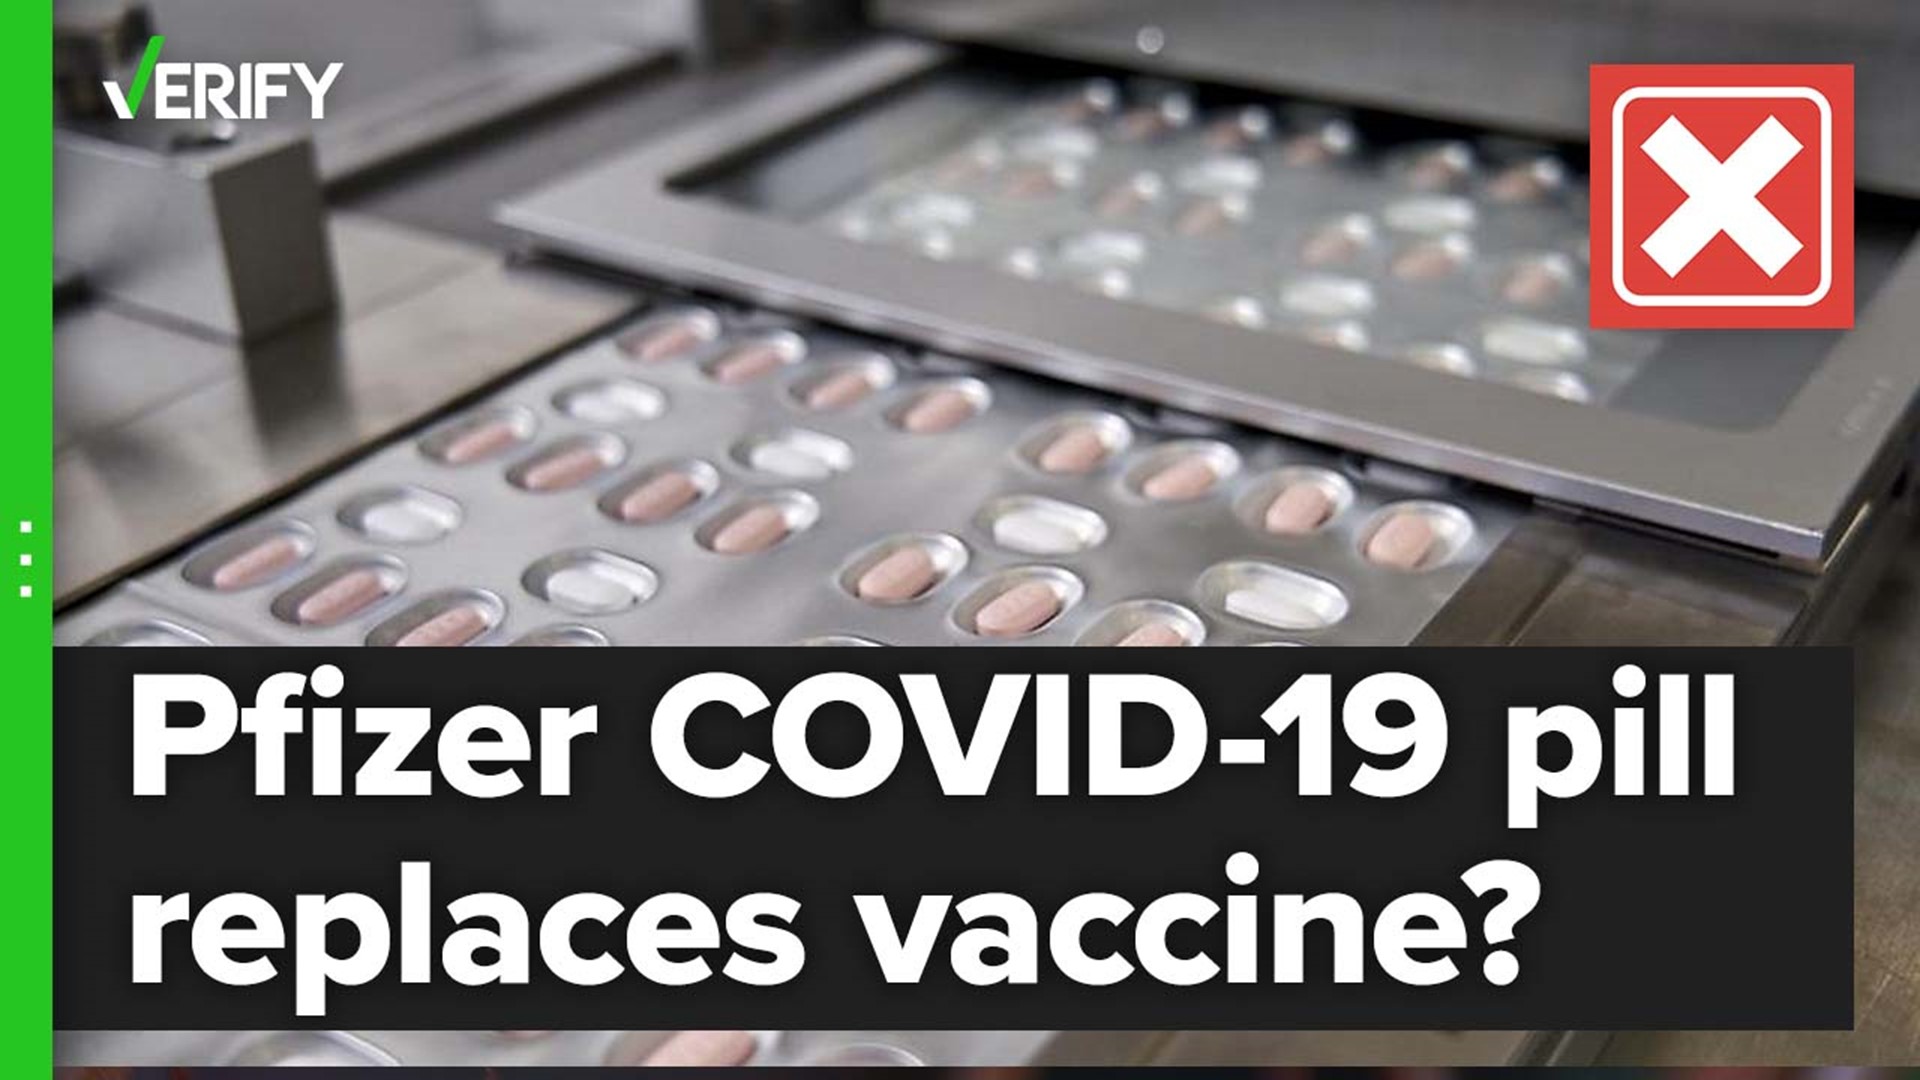 Some posts on social media have suggested a vaccine isn’t necessary if there’s a pill to treat COVID-19. But the vaccines and pills do two different things.